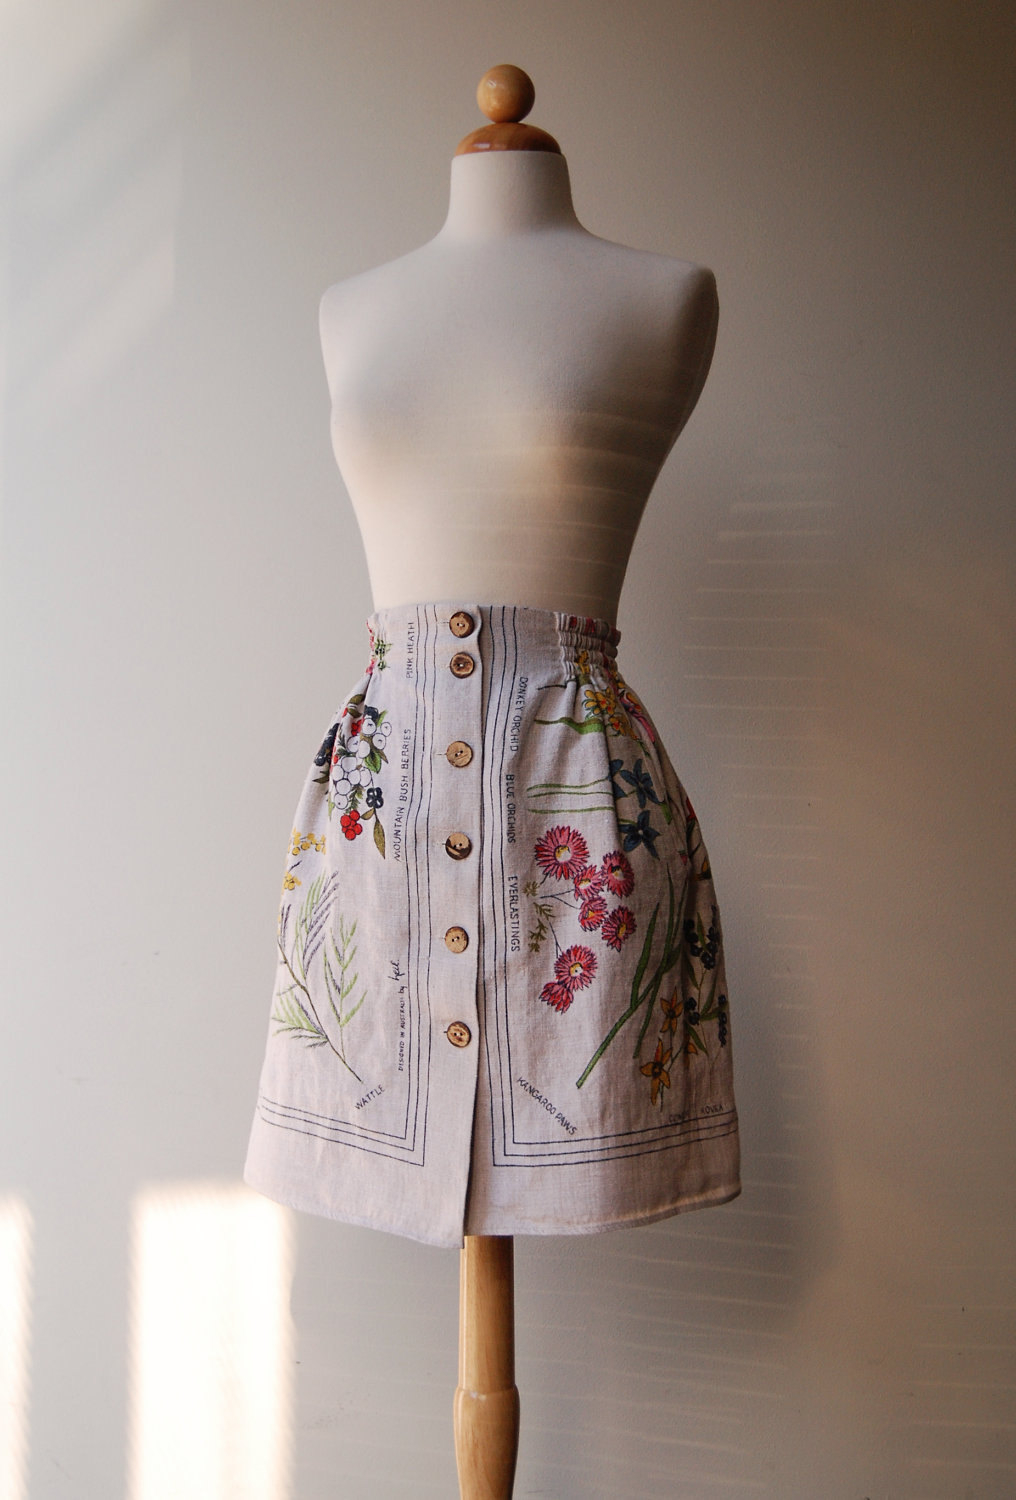 Upcycled linen tablecloth skirt for an